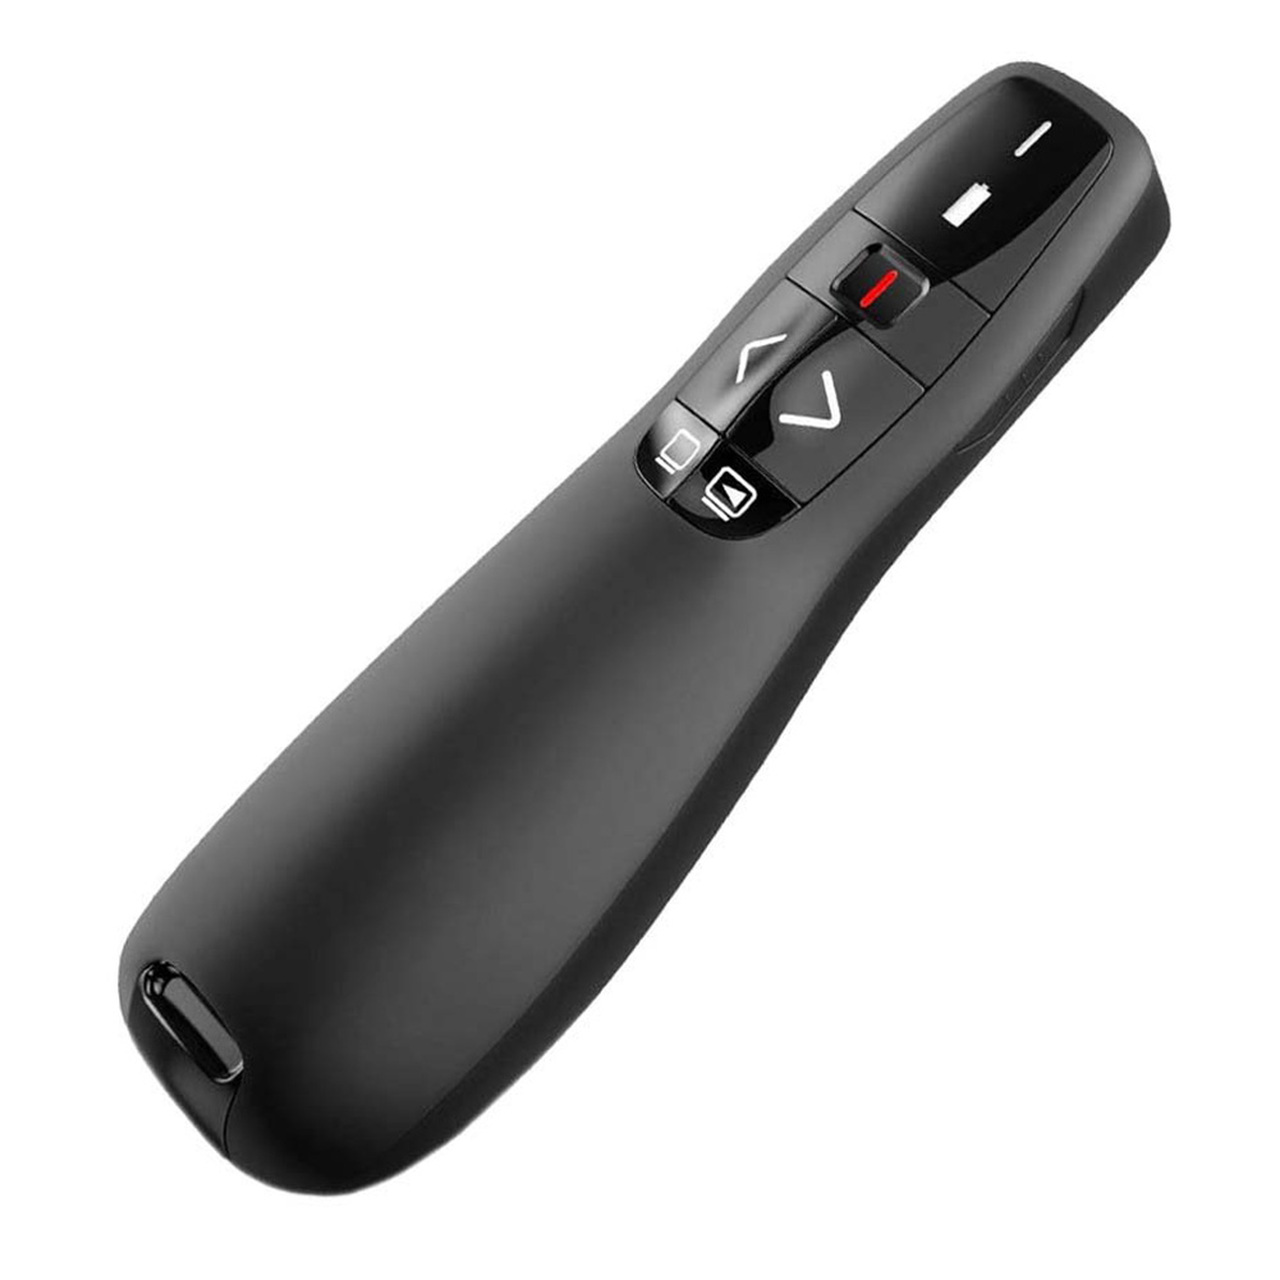 2.4ghz wireless presenter control clicker with usb for mac works on led or lcd screen?